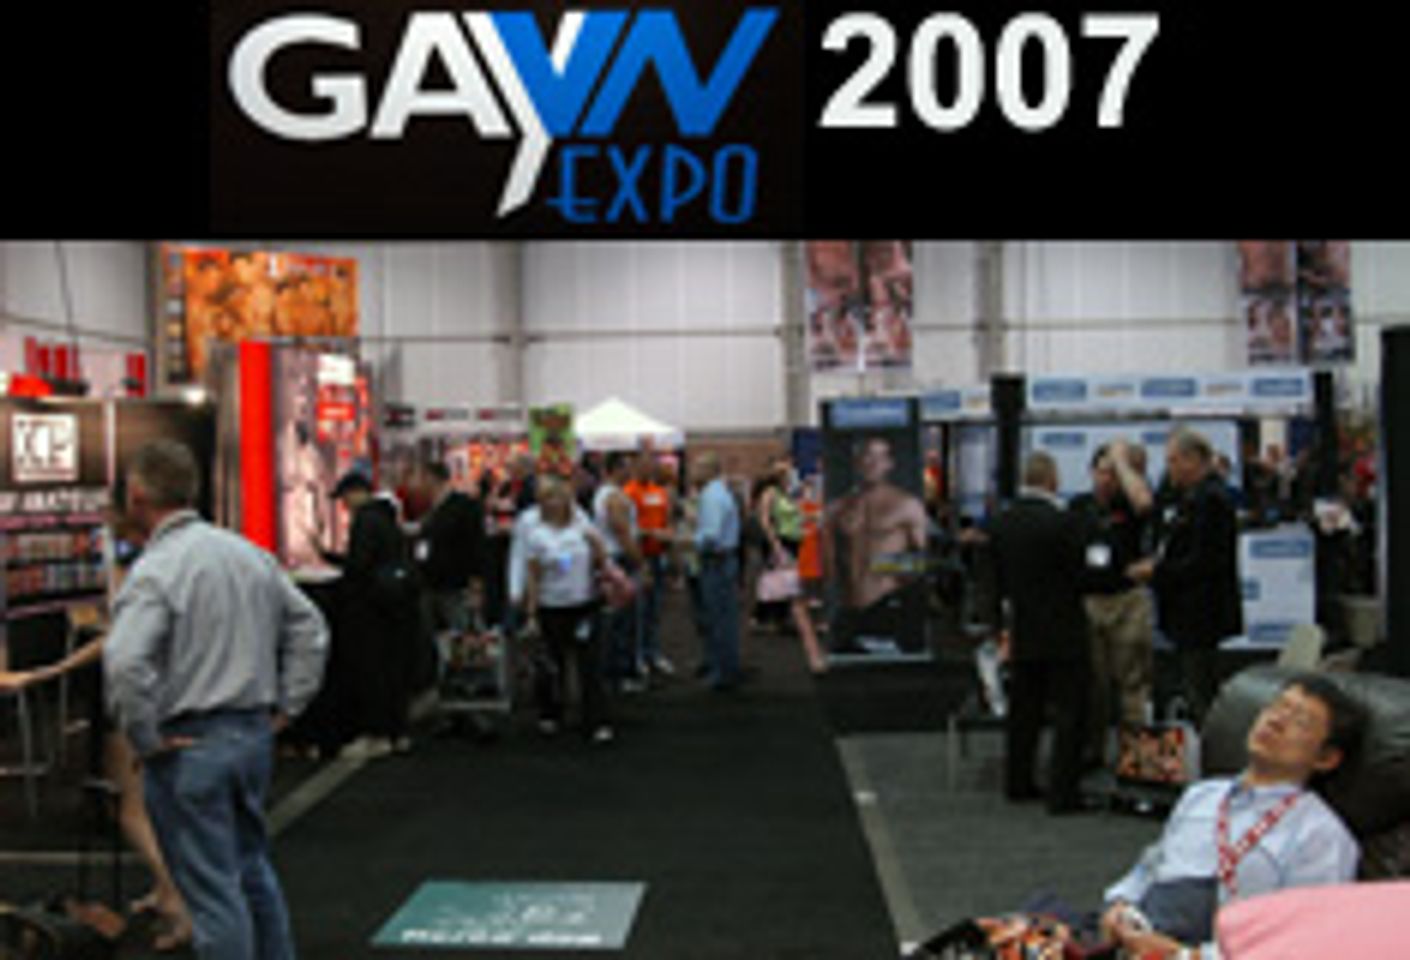 GAYVN Expo Ends with Smiles